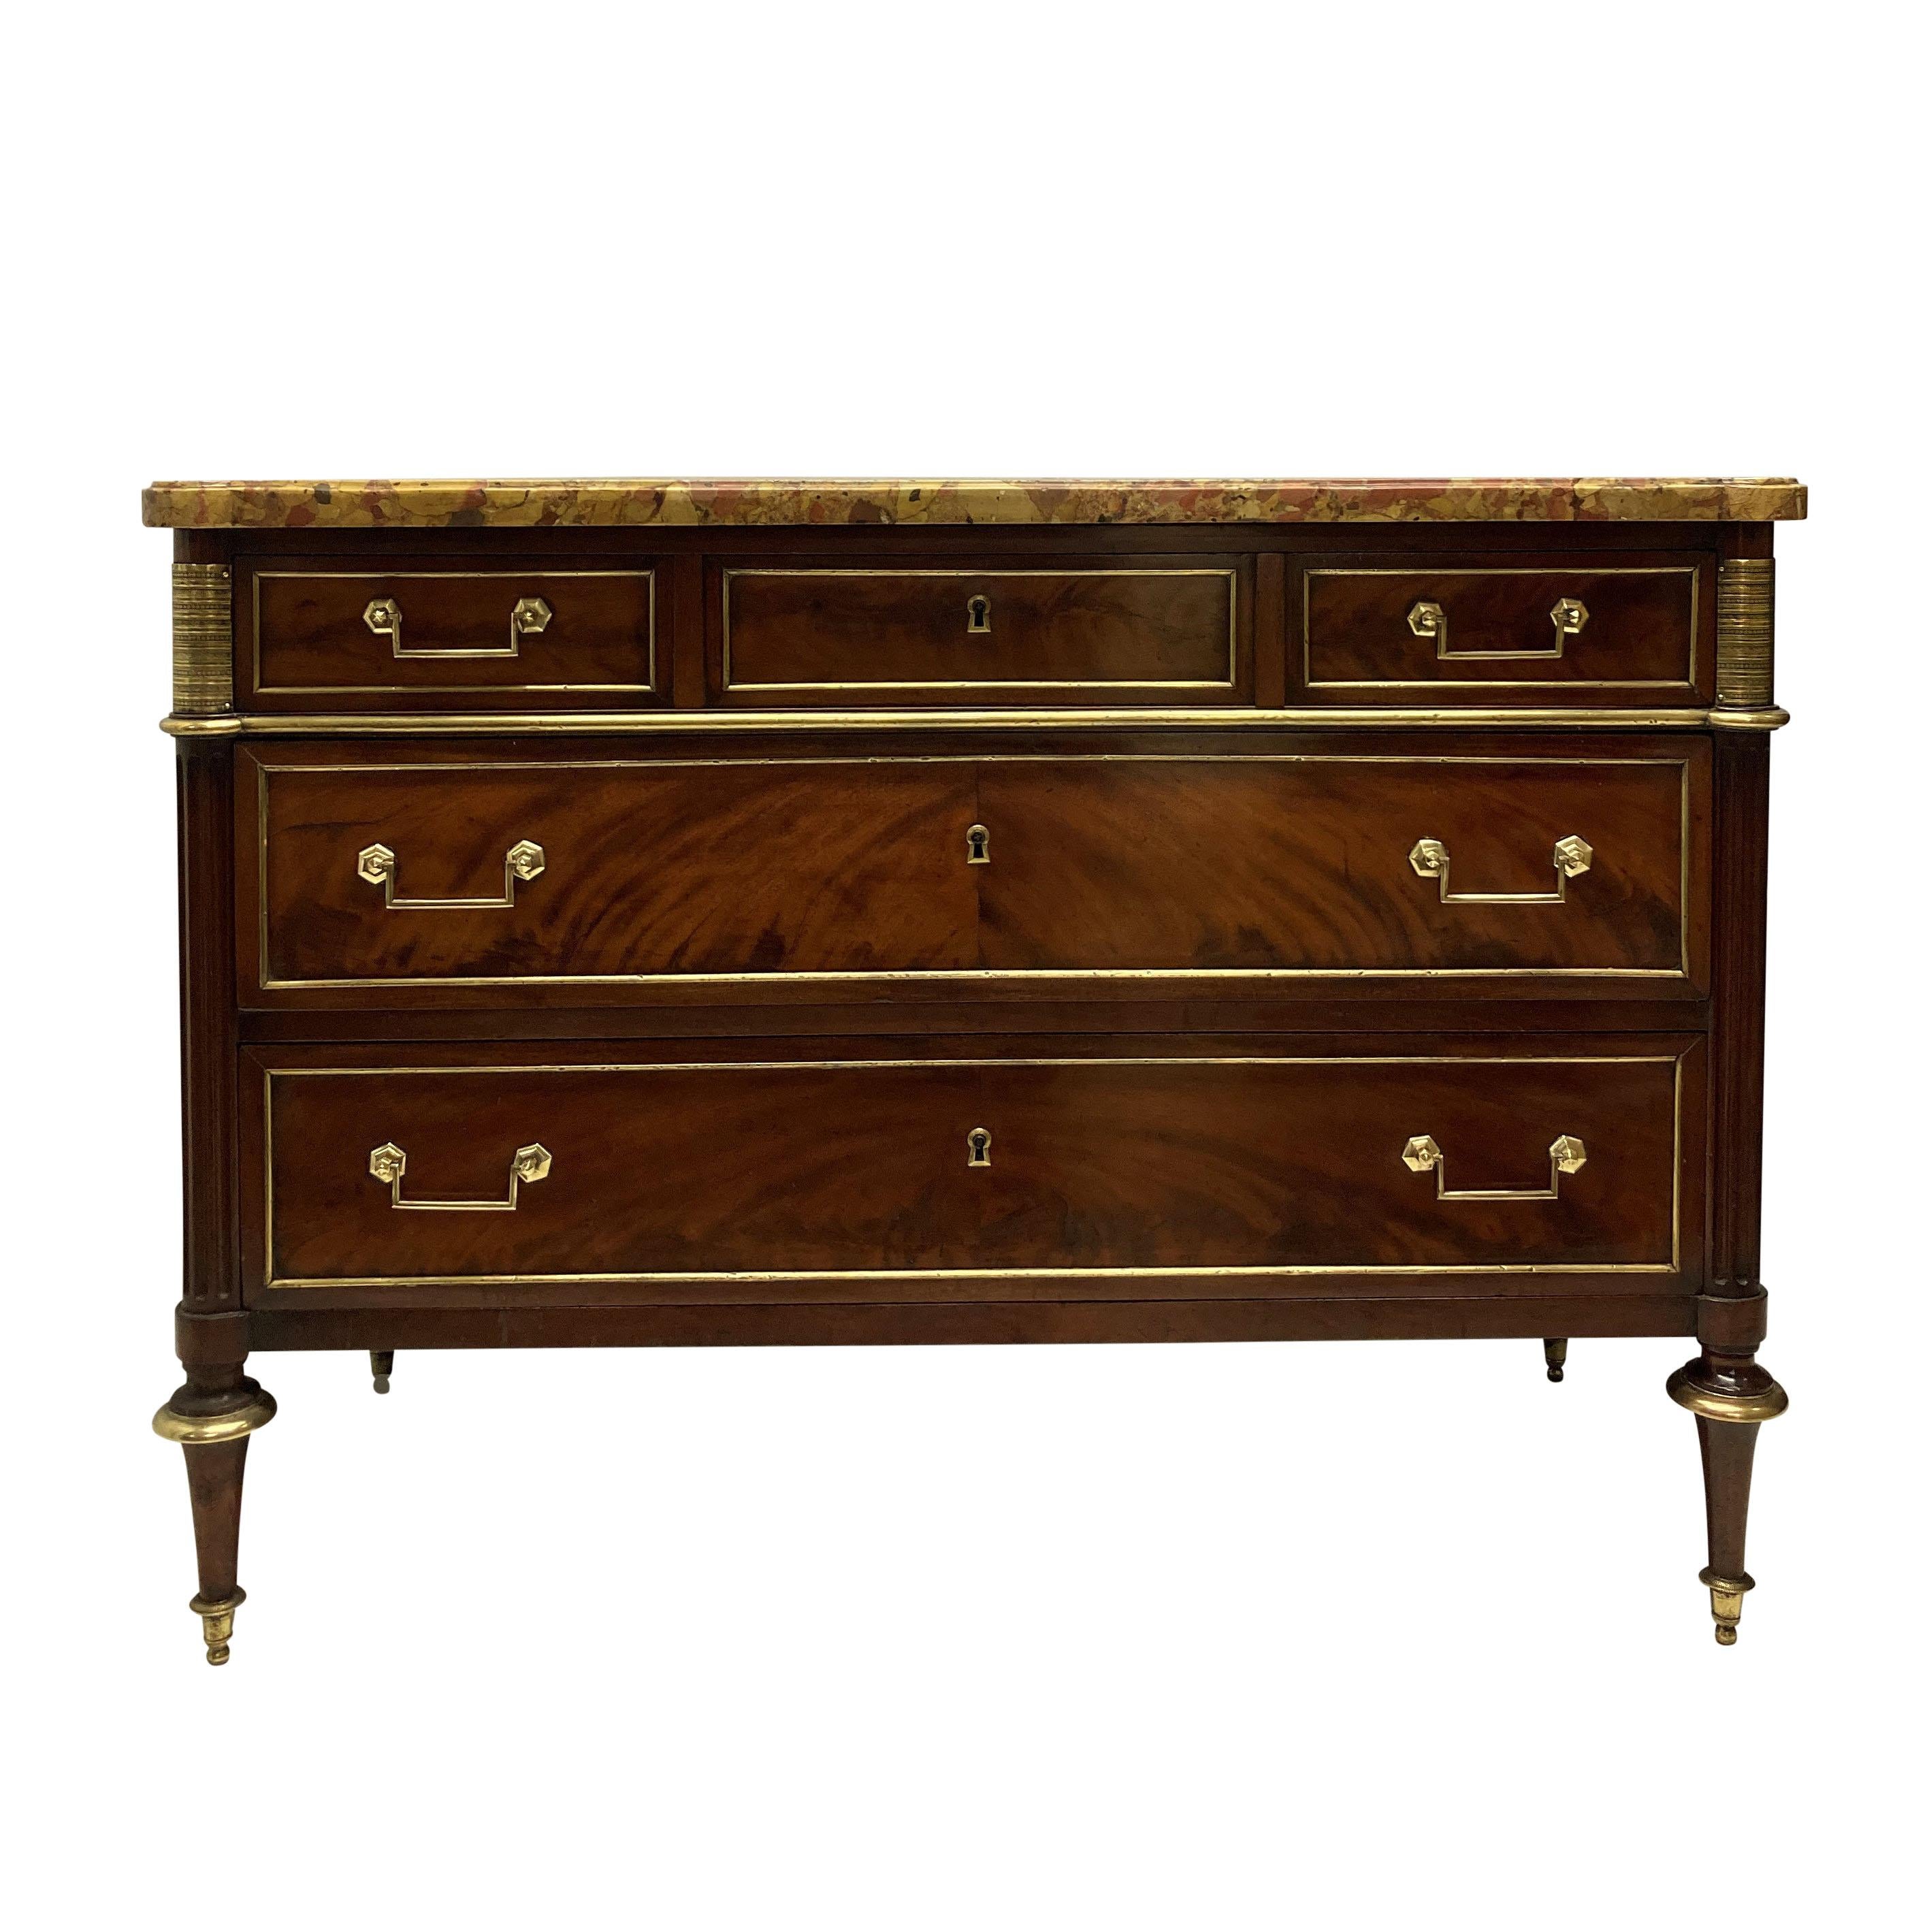 A fine French mahogany three draw Directoire commode, with gilt bronze mounts and detailing, with a breche d'alep marble top.